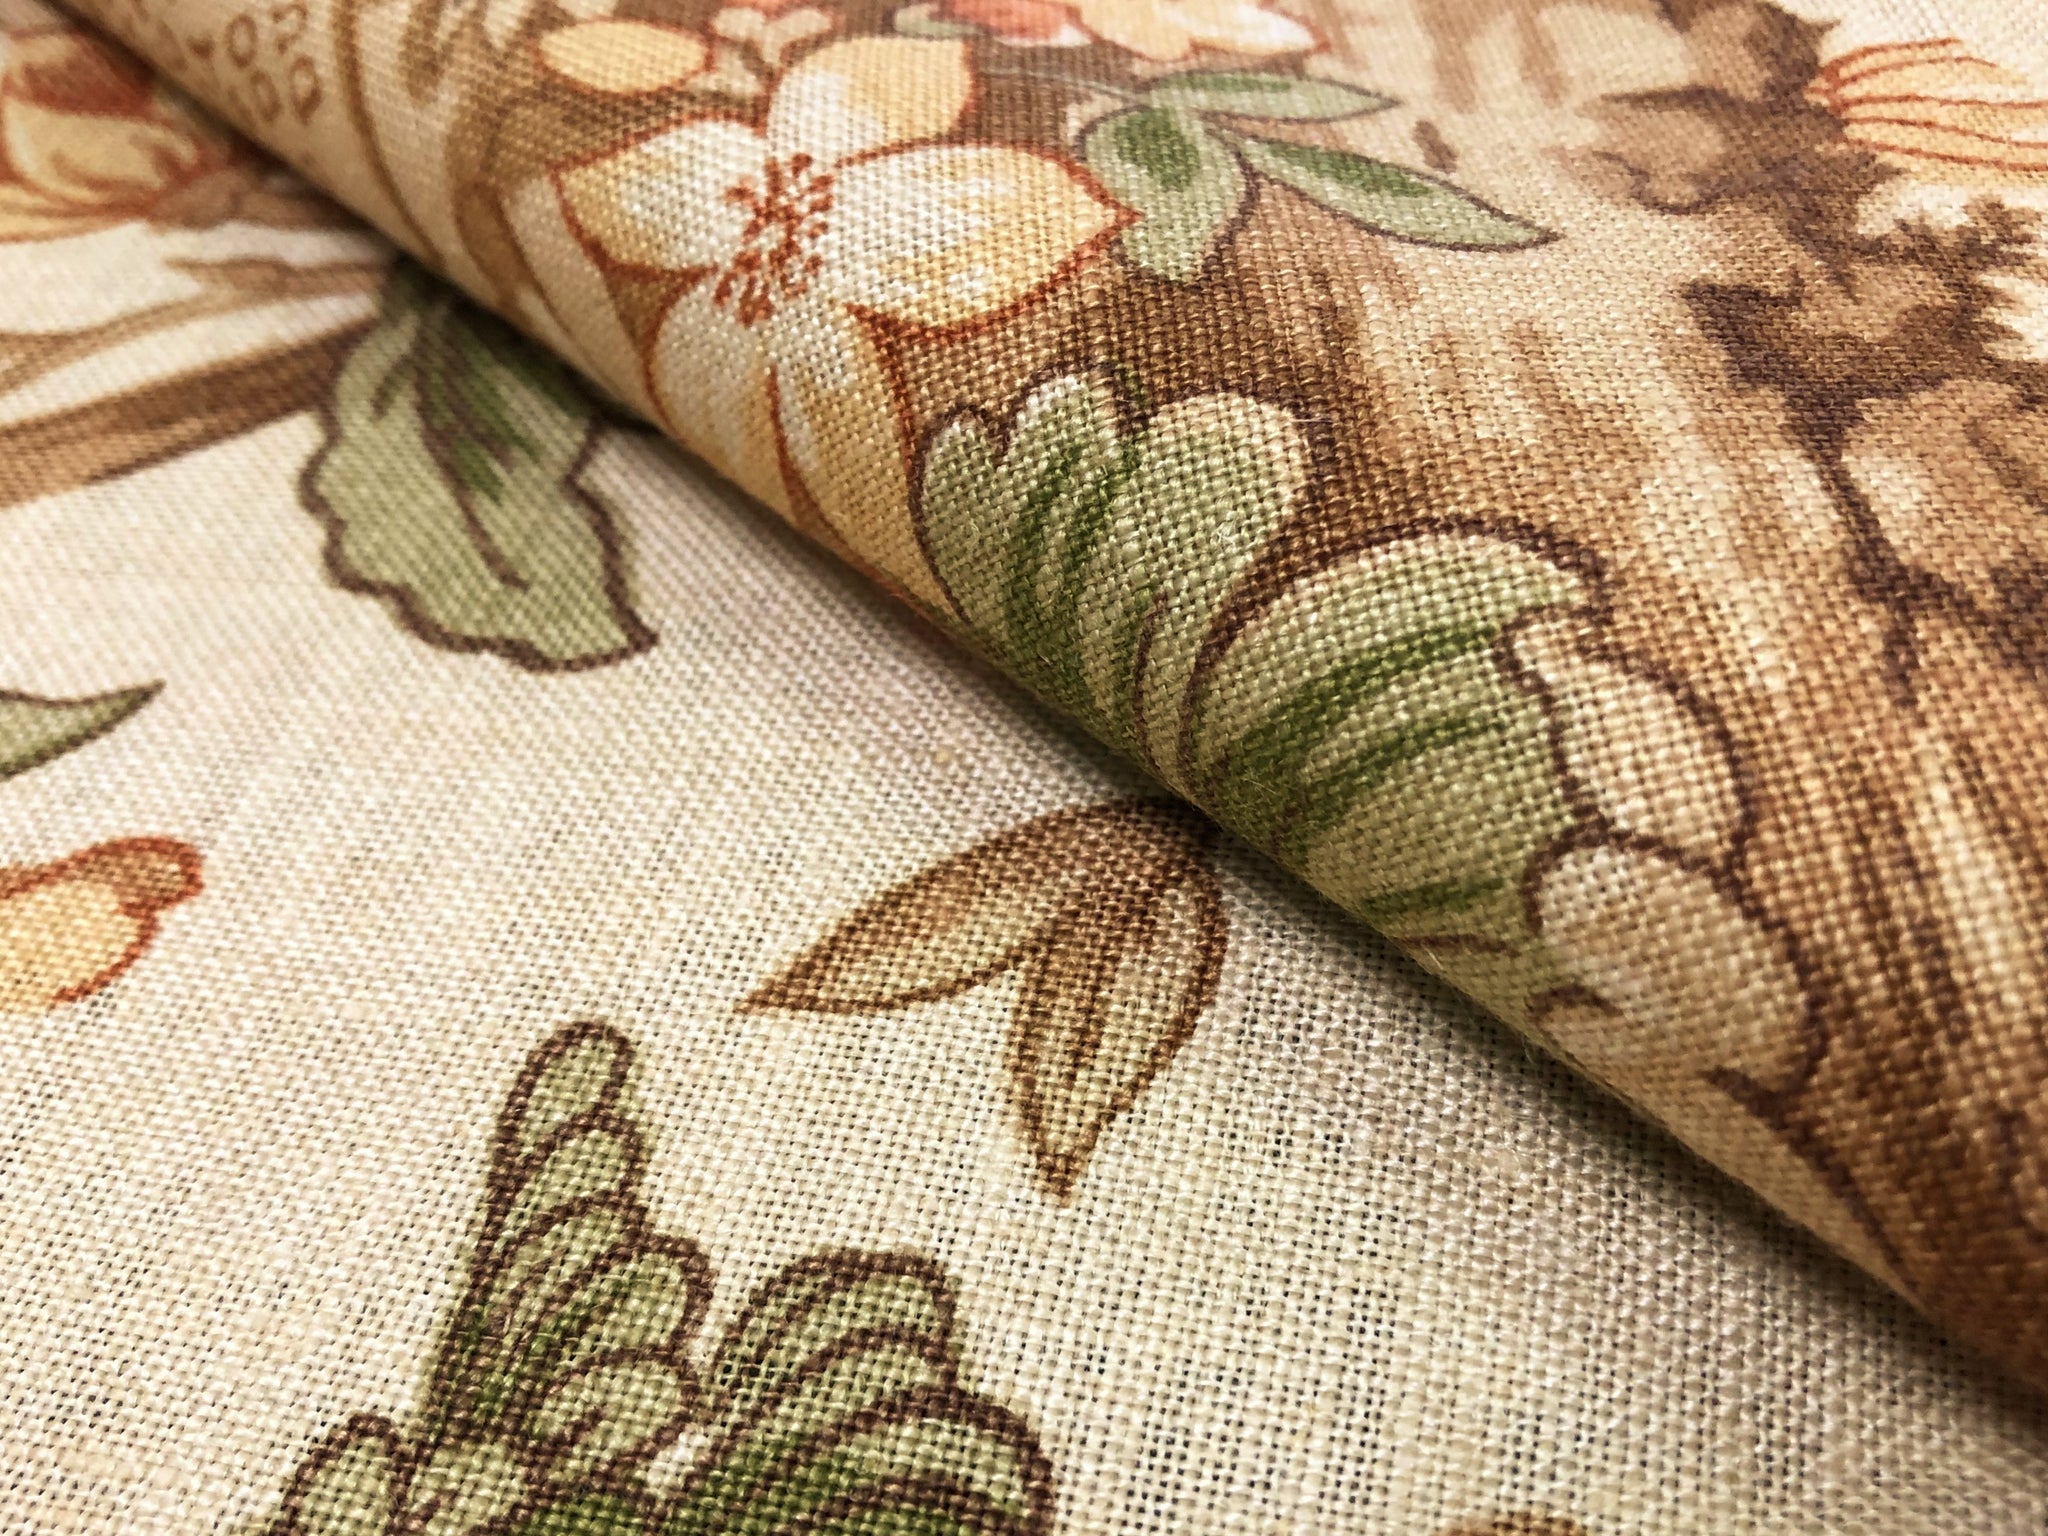 Beige Coral Botanical Embroidered Drapery Fabric, Fabric Bistro, Columbia